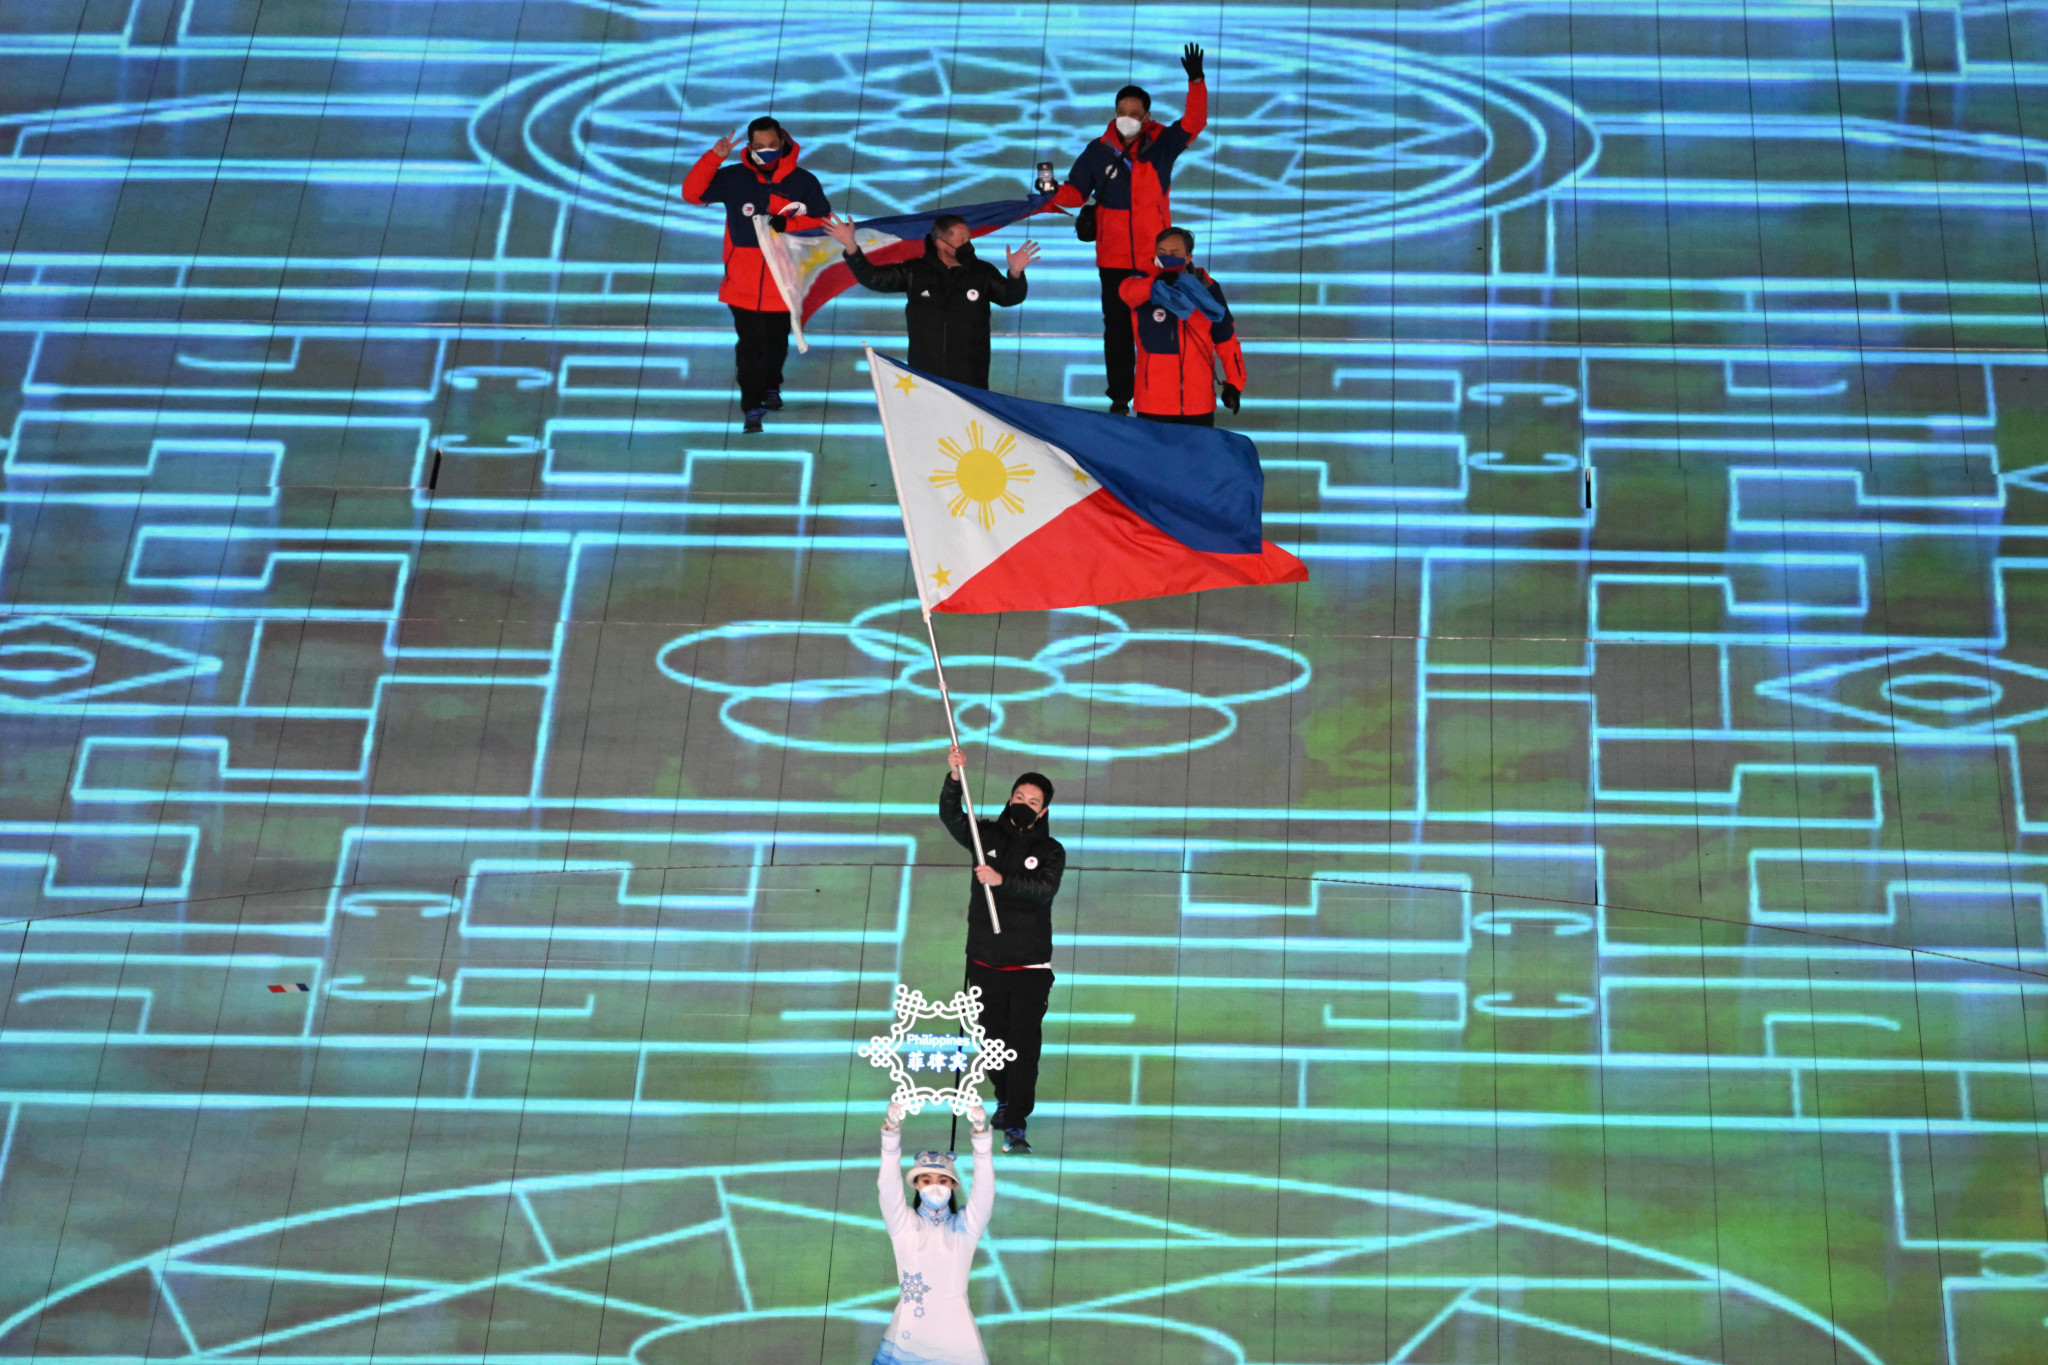 The Philippines won two golds at the JJIF World Championships in Abu Dhabi ©Getty Images